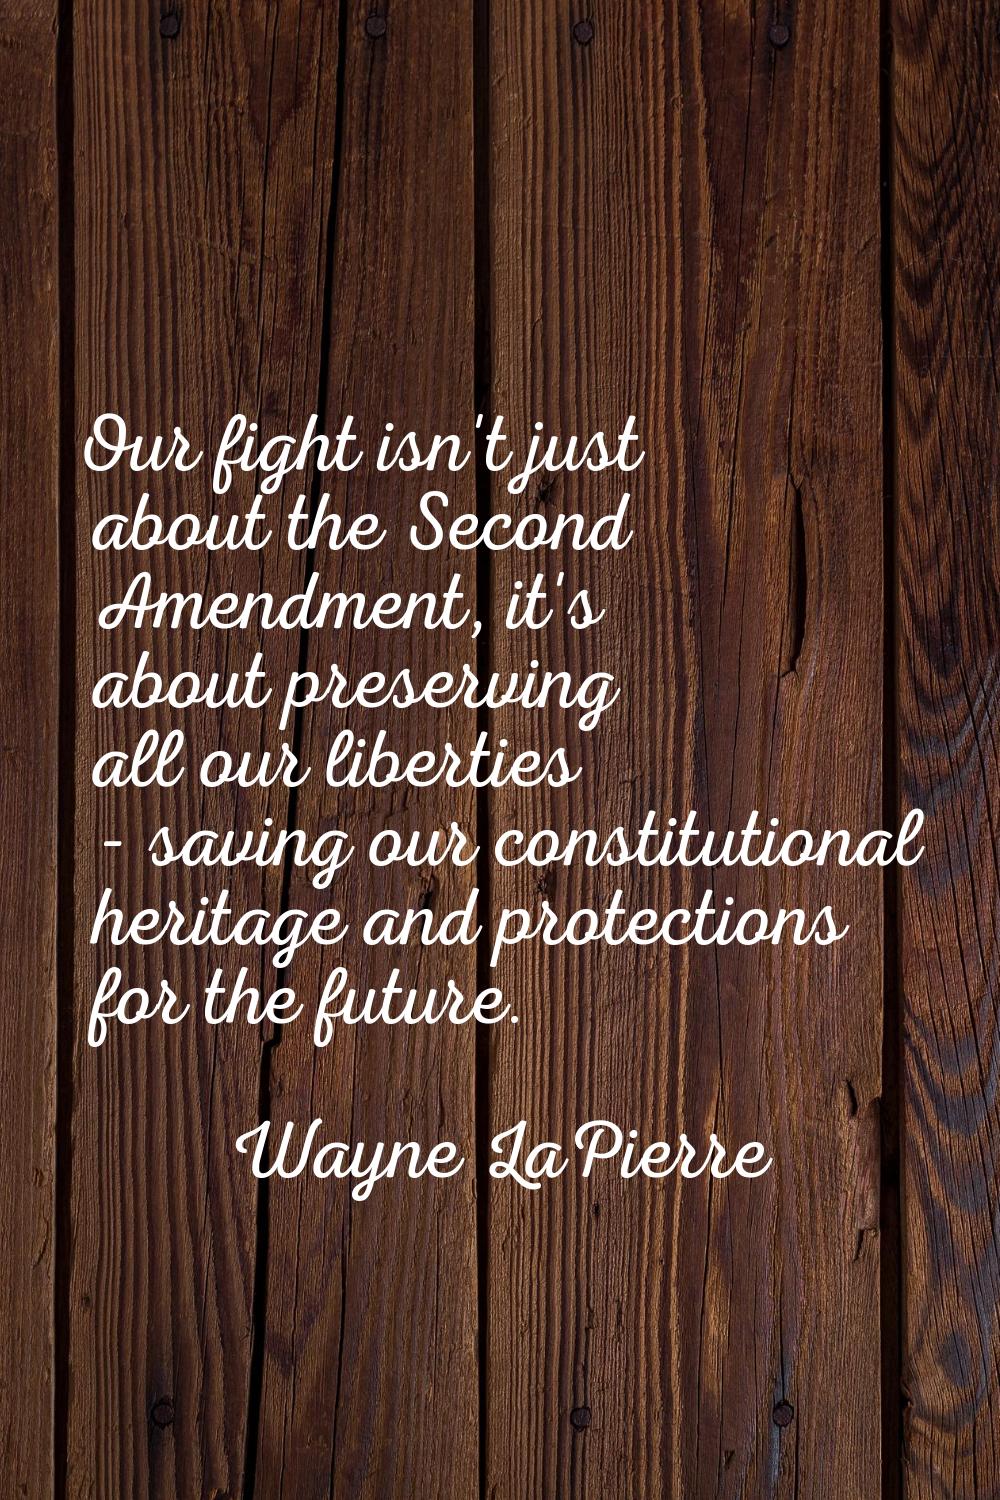 Our fight isn't just about the Second Amendment, it's about preserving all our liberties - saving o